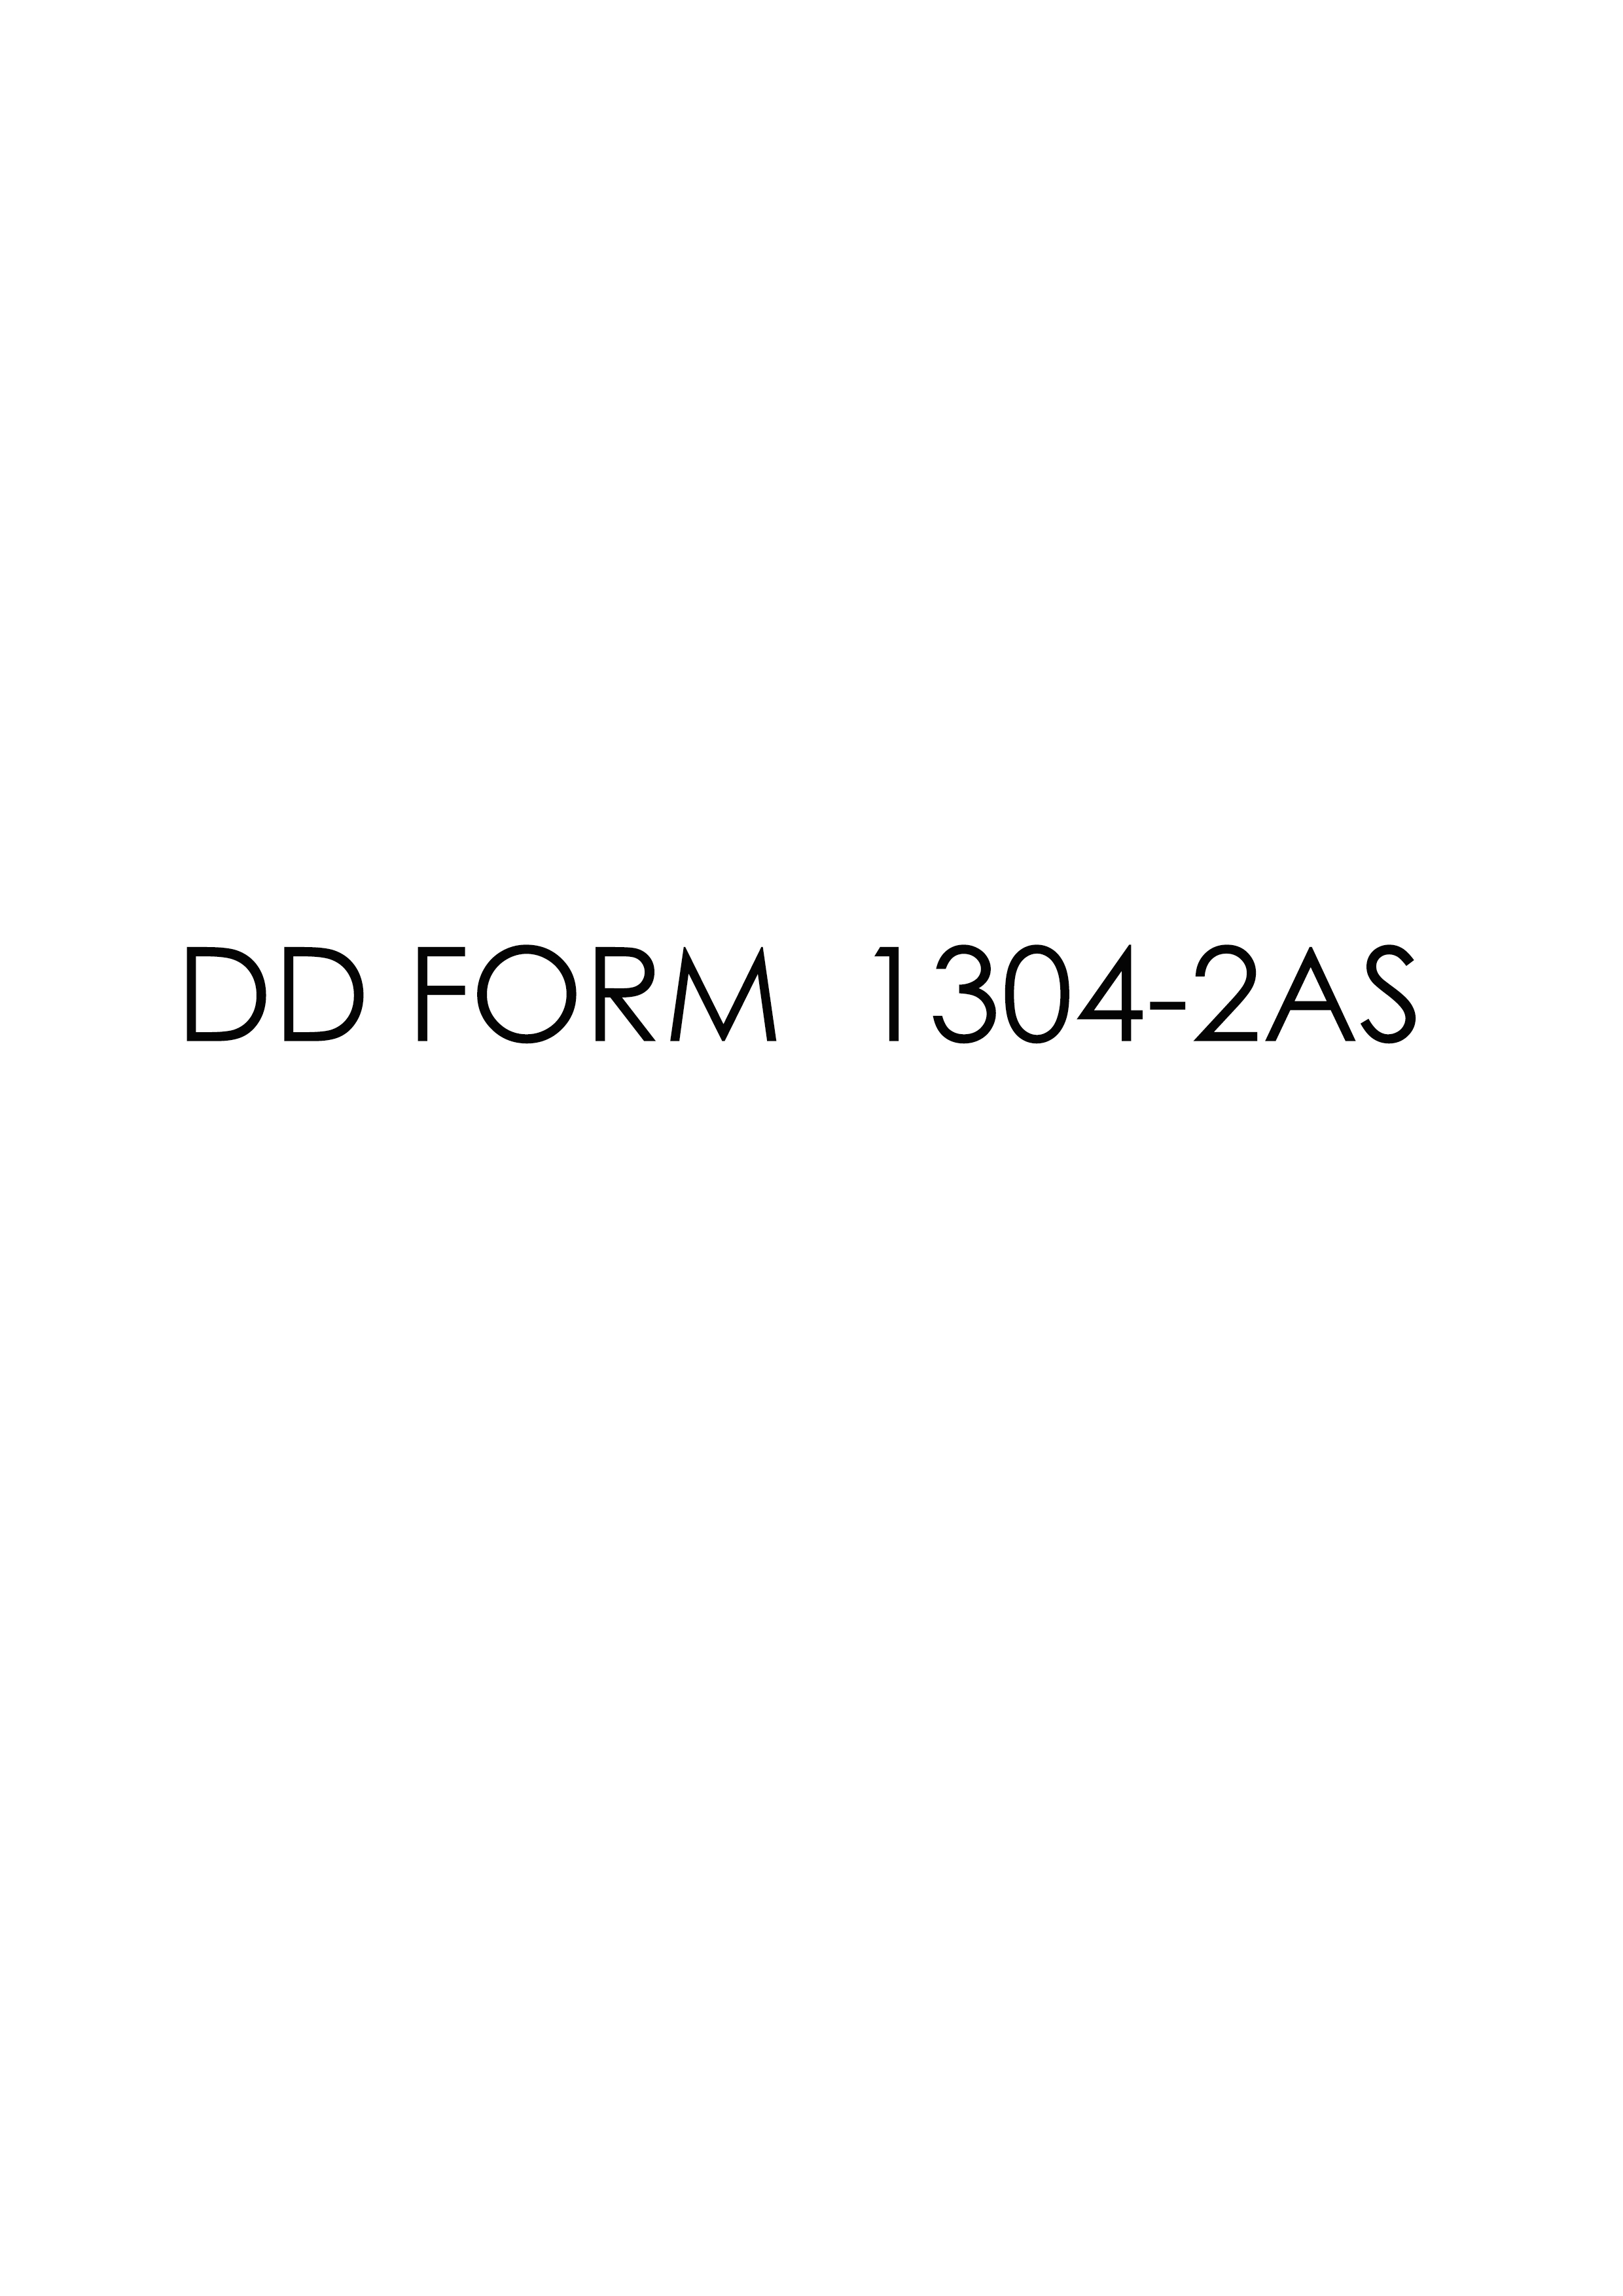 Download dd 1304-2AS